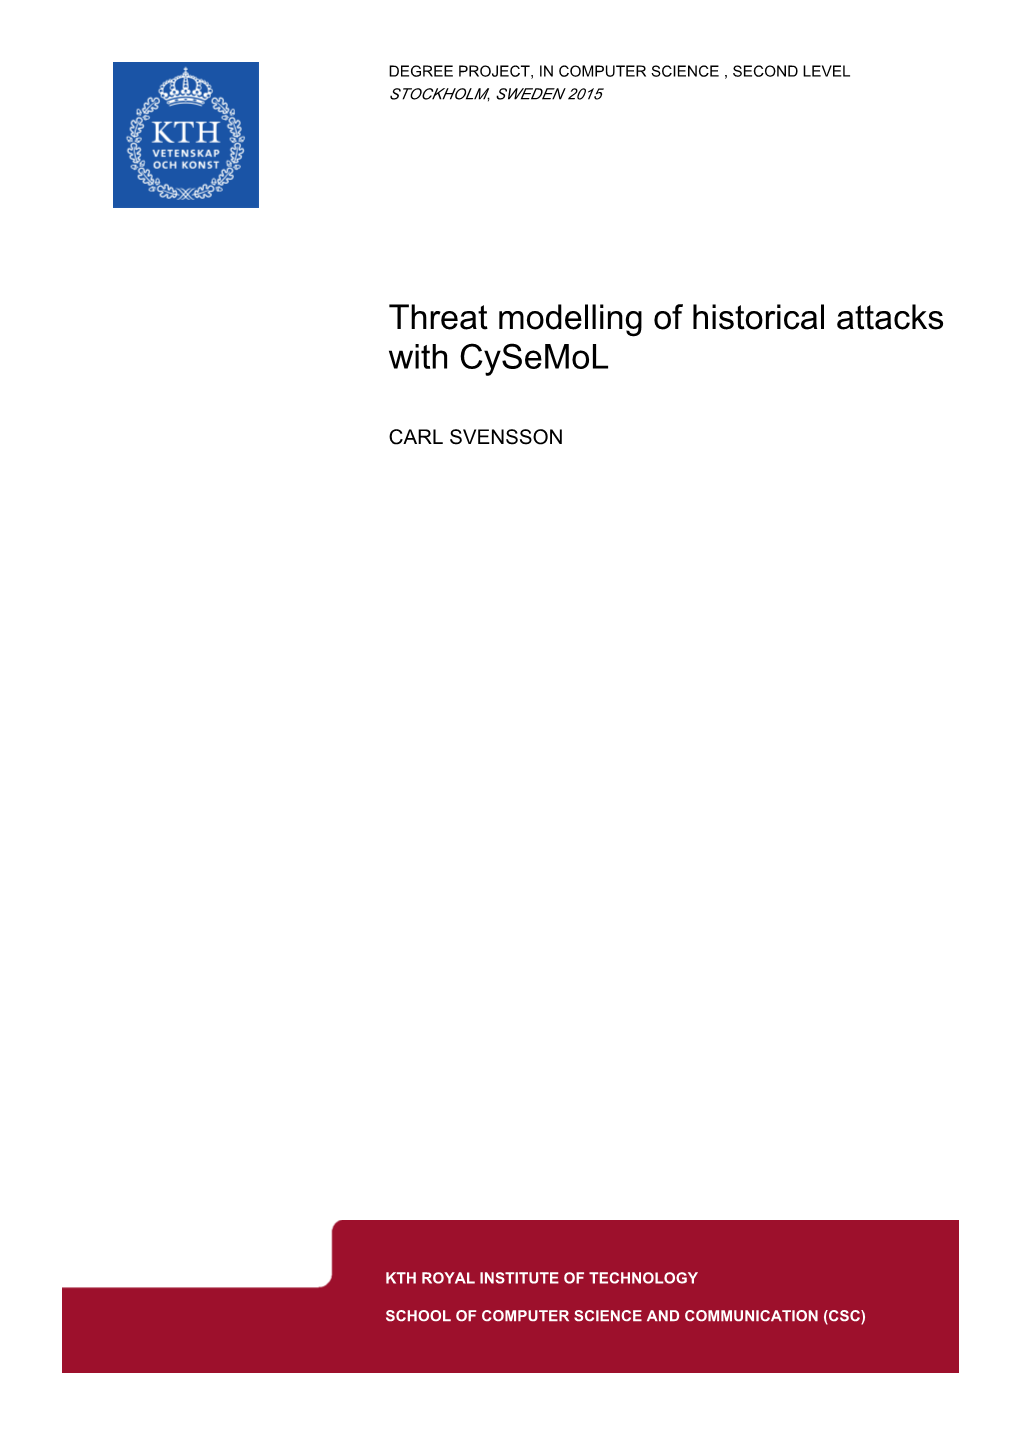 Threat Modelling of Historical Attacks with Cysemol